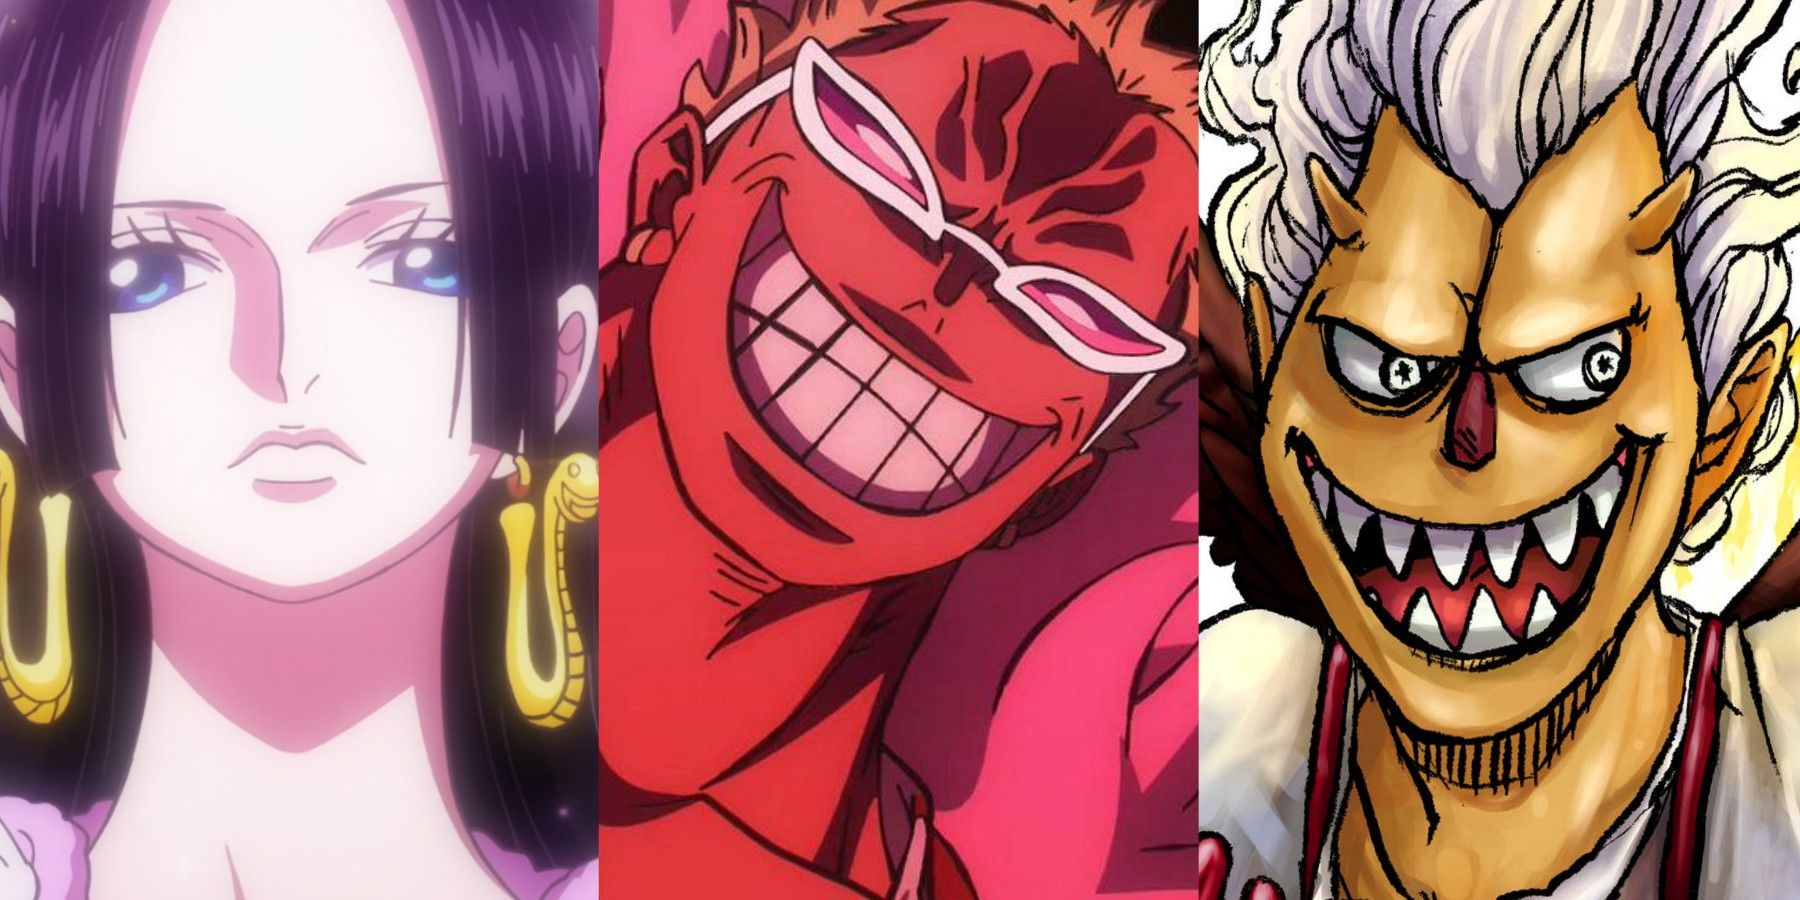 featured one piece characters that could join the cross guild Doflamingo moria boa hancock